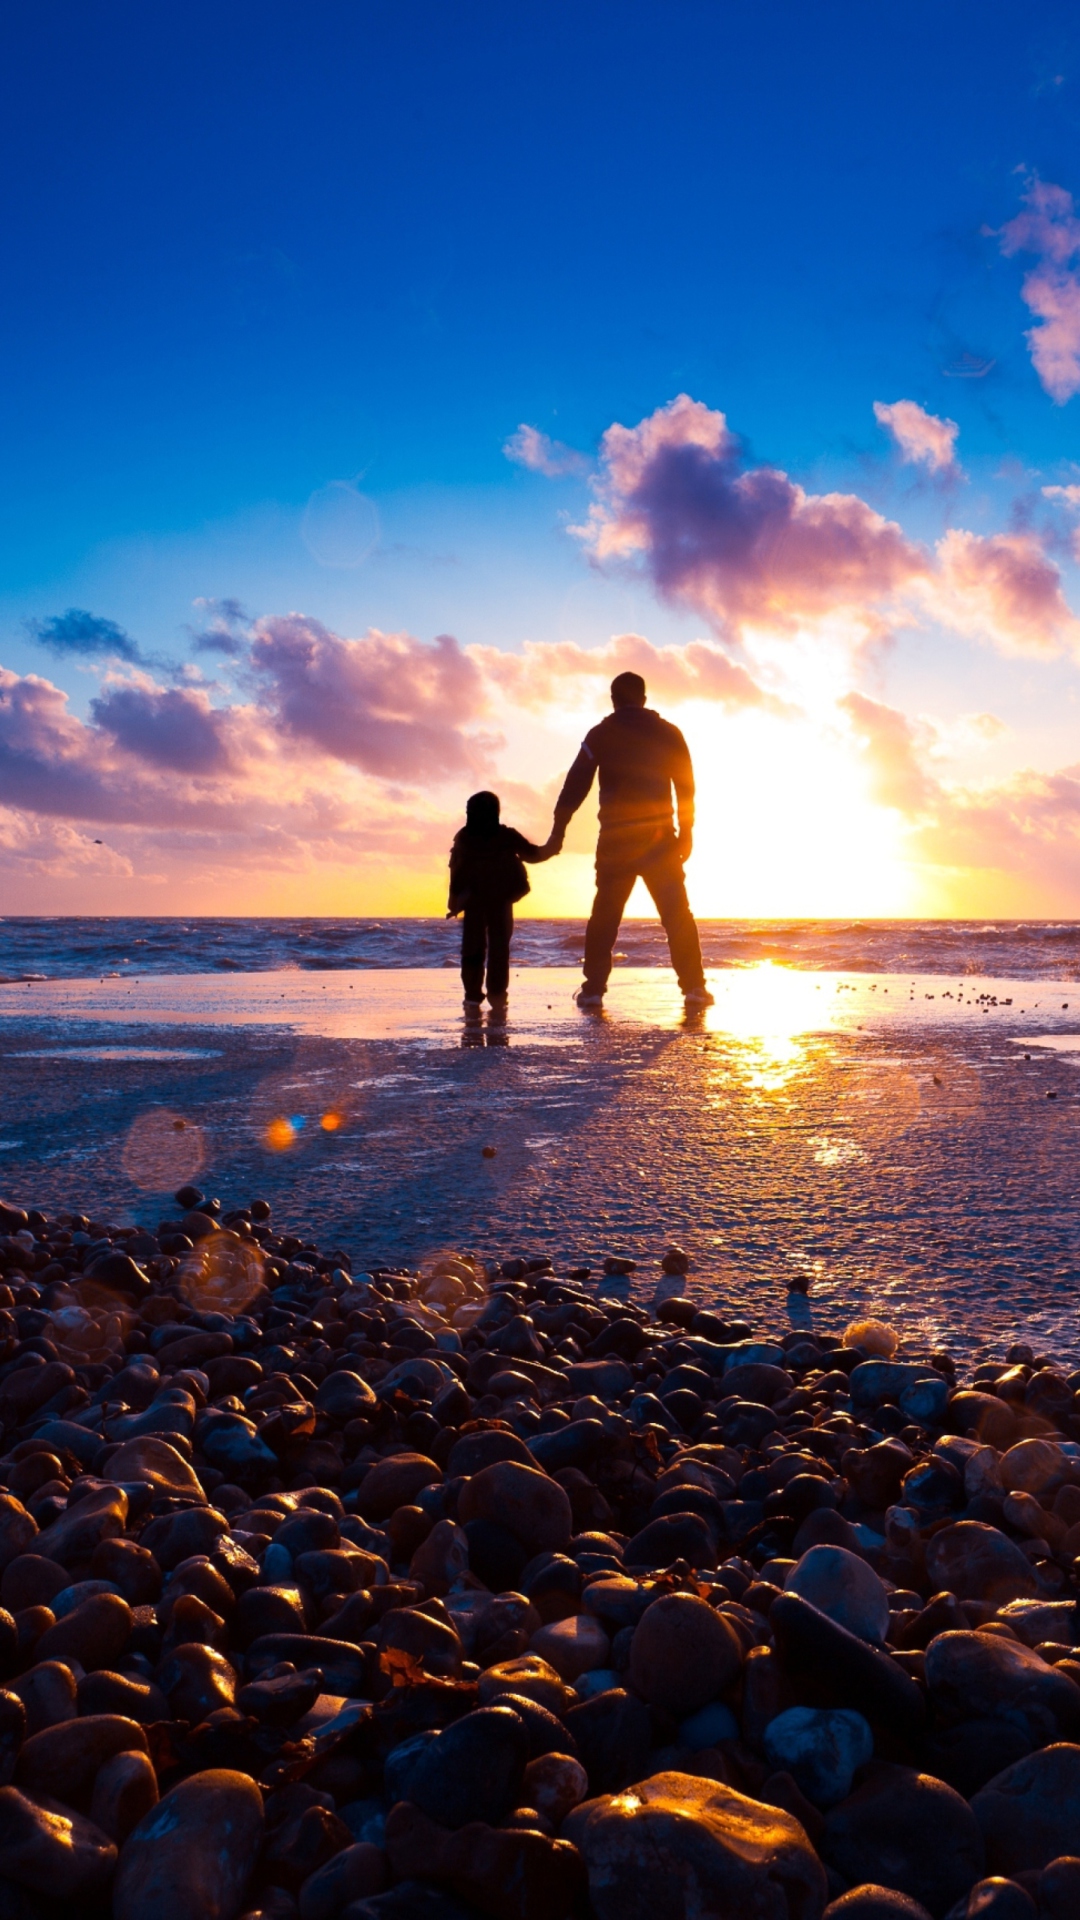 father and son wallpaper,people in nature,sky,photograph,horizon,shore